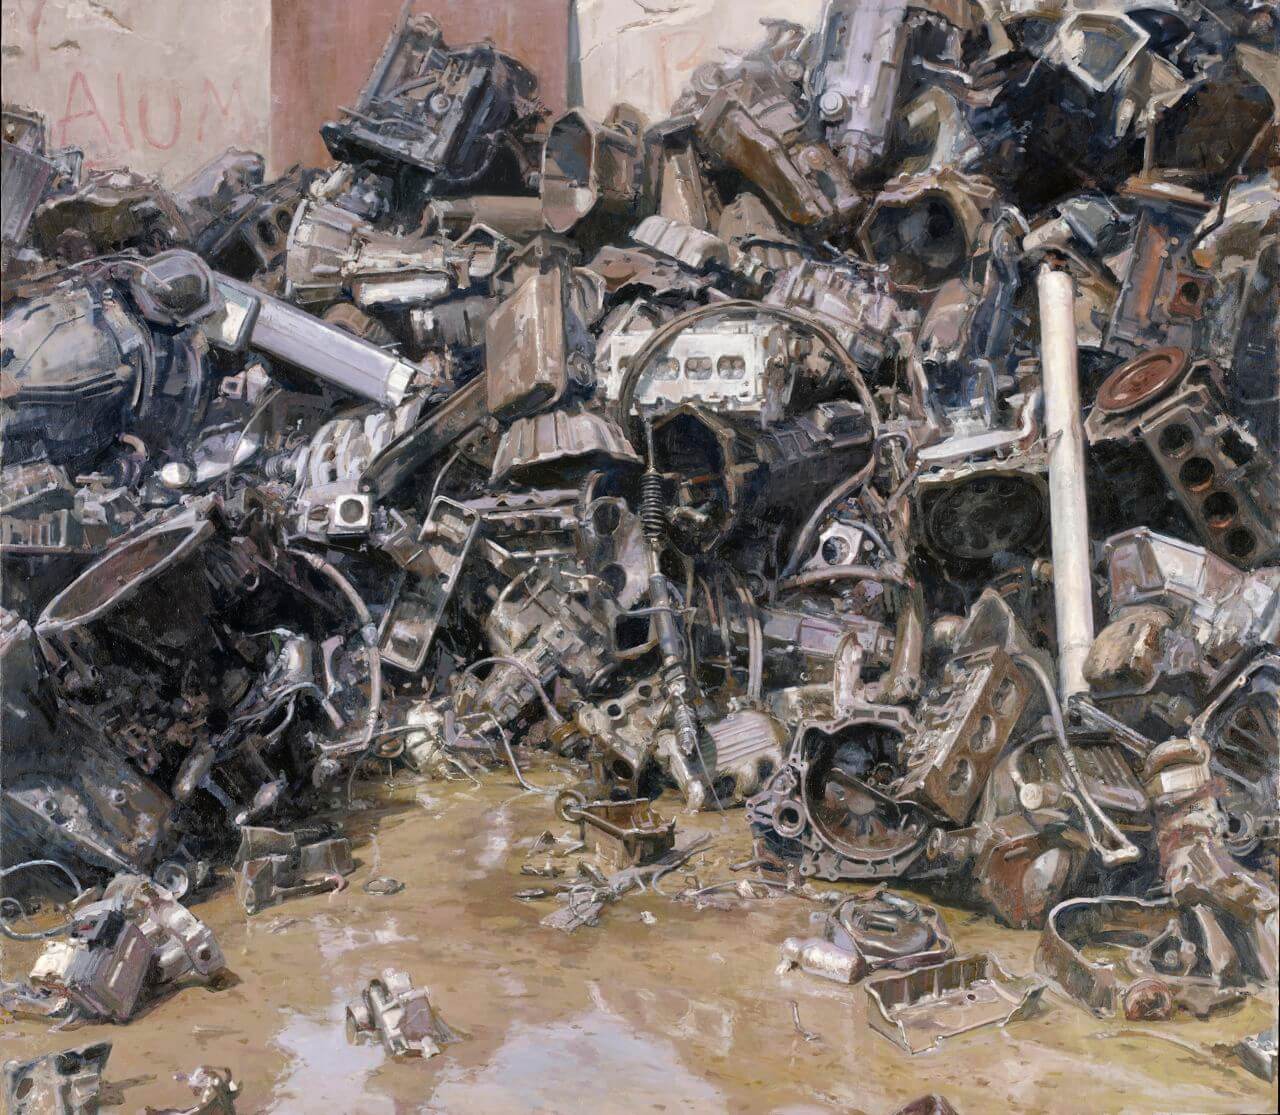 Michael Karaken, Scrap Engines, 2009, oil on canvas, 84 x 96 inches (courtesy of the artist)